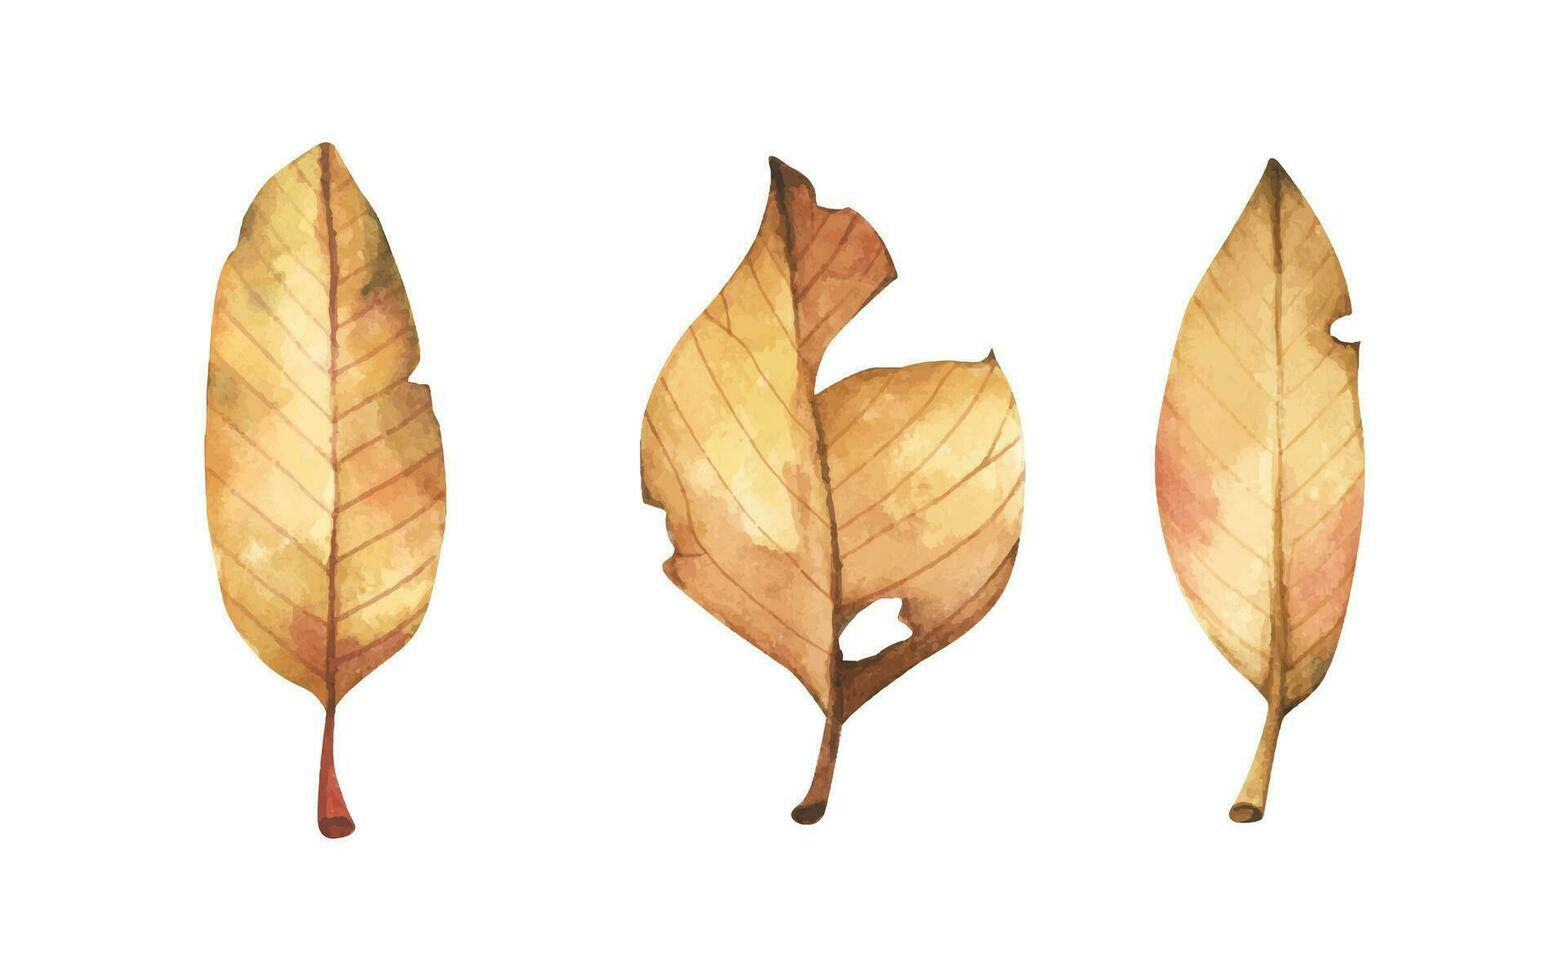 Collection of multicolored fallen autumn leaves. Watercolor illustration. vector